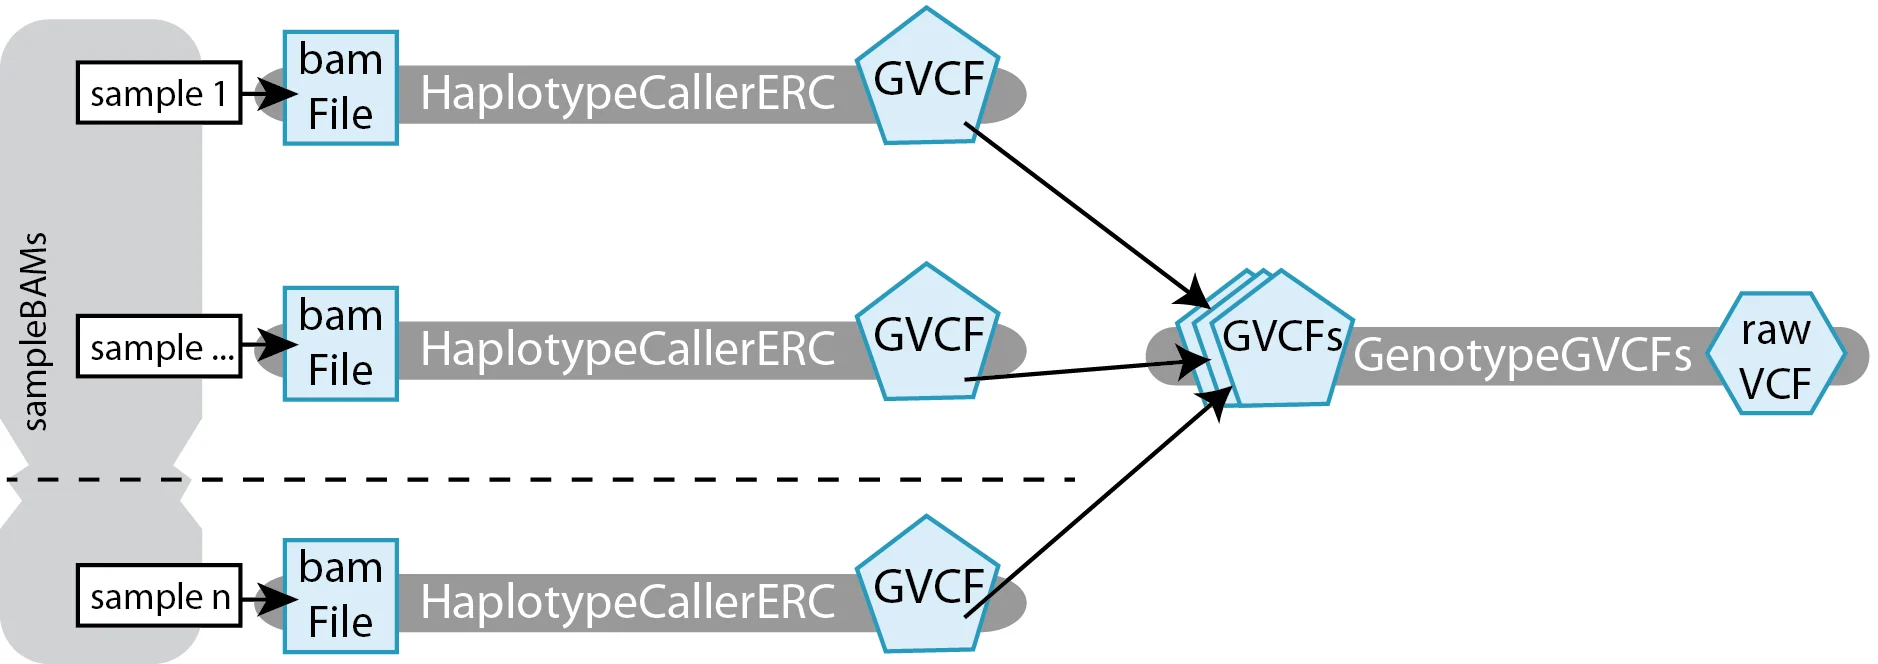 Diagram depicting how three individual sample BAM files are used as input to the HaplotypeCallerERC tools in parallel. Each individual run of the tool produces a GVCF. The GVCFs are gathered and the array is used as an input to the GenotypeGVCFs tool, which produces a raw VCF file as final output.